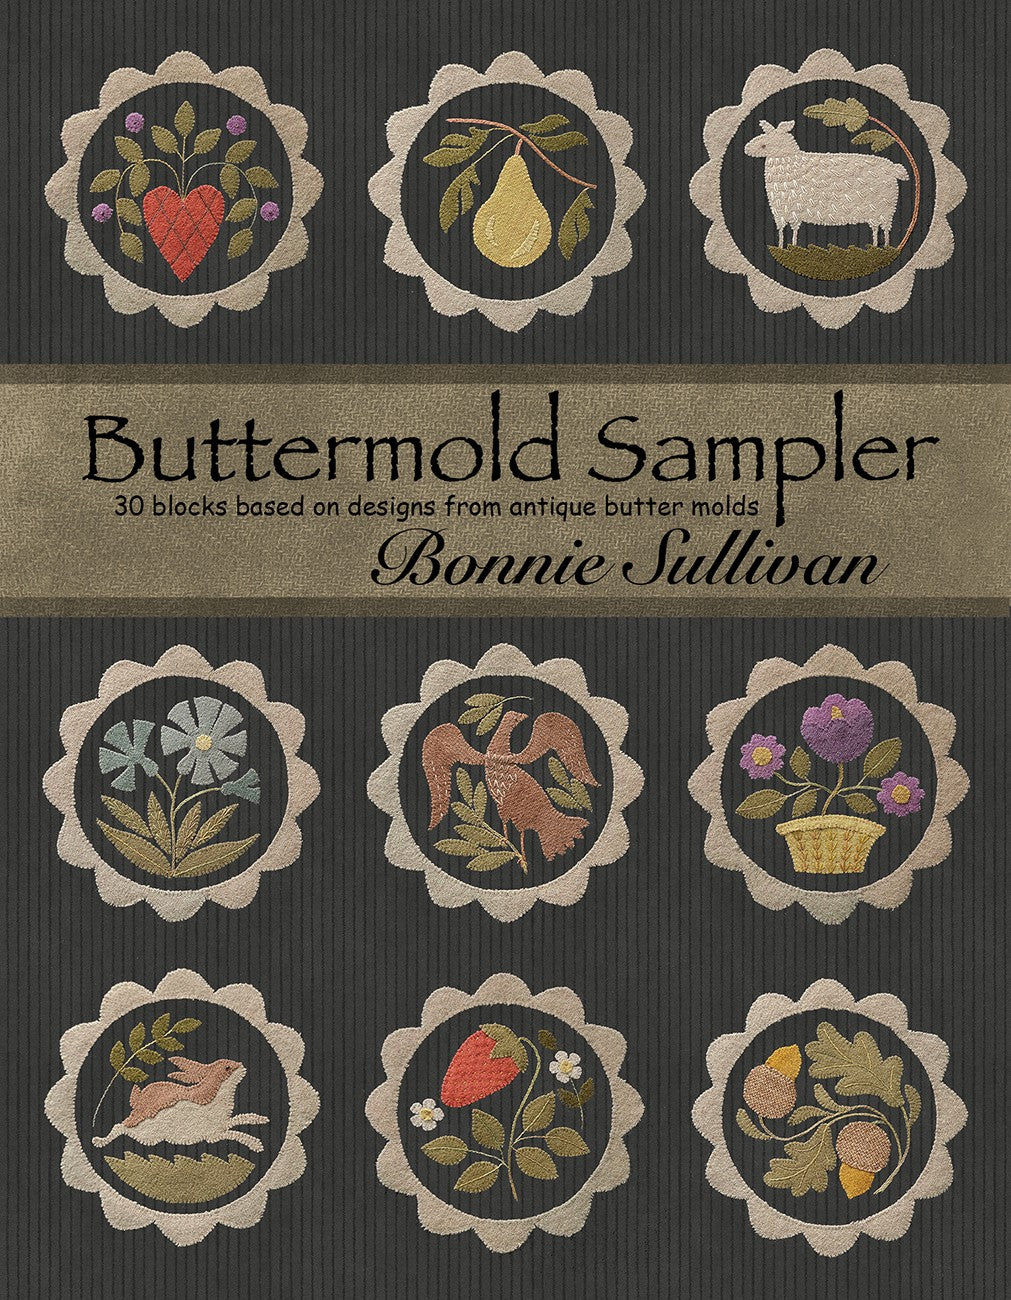 The Buttermold Sampler Collections